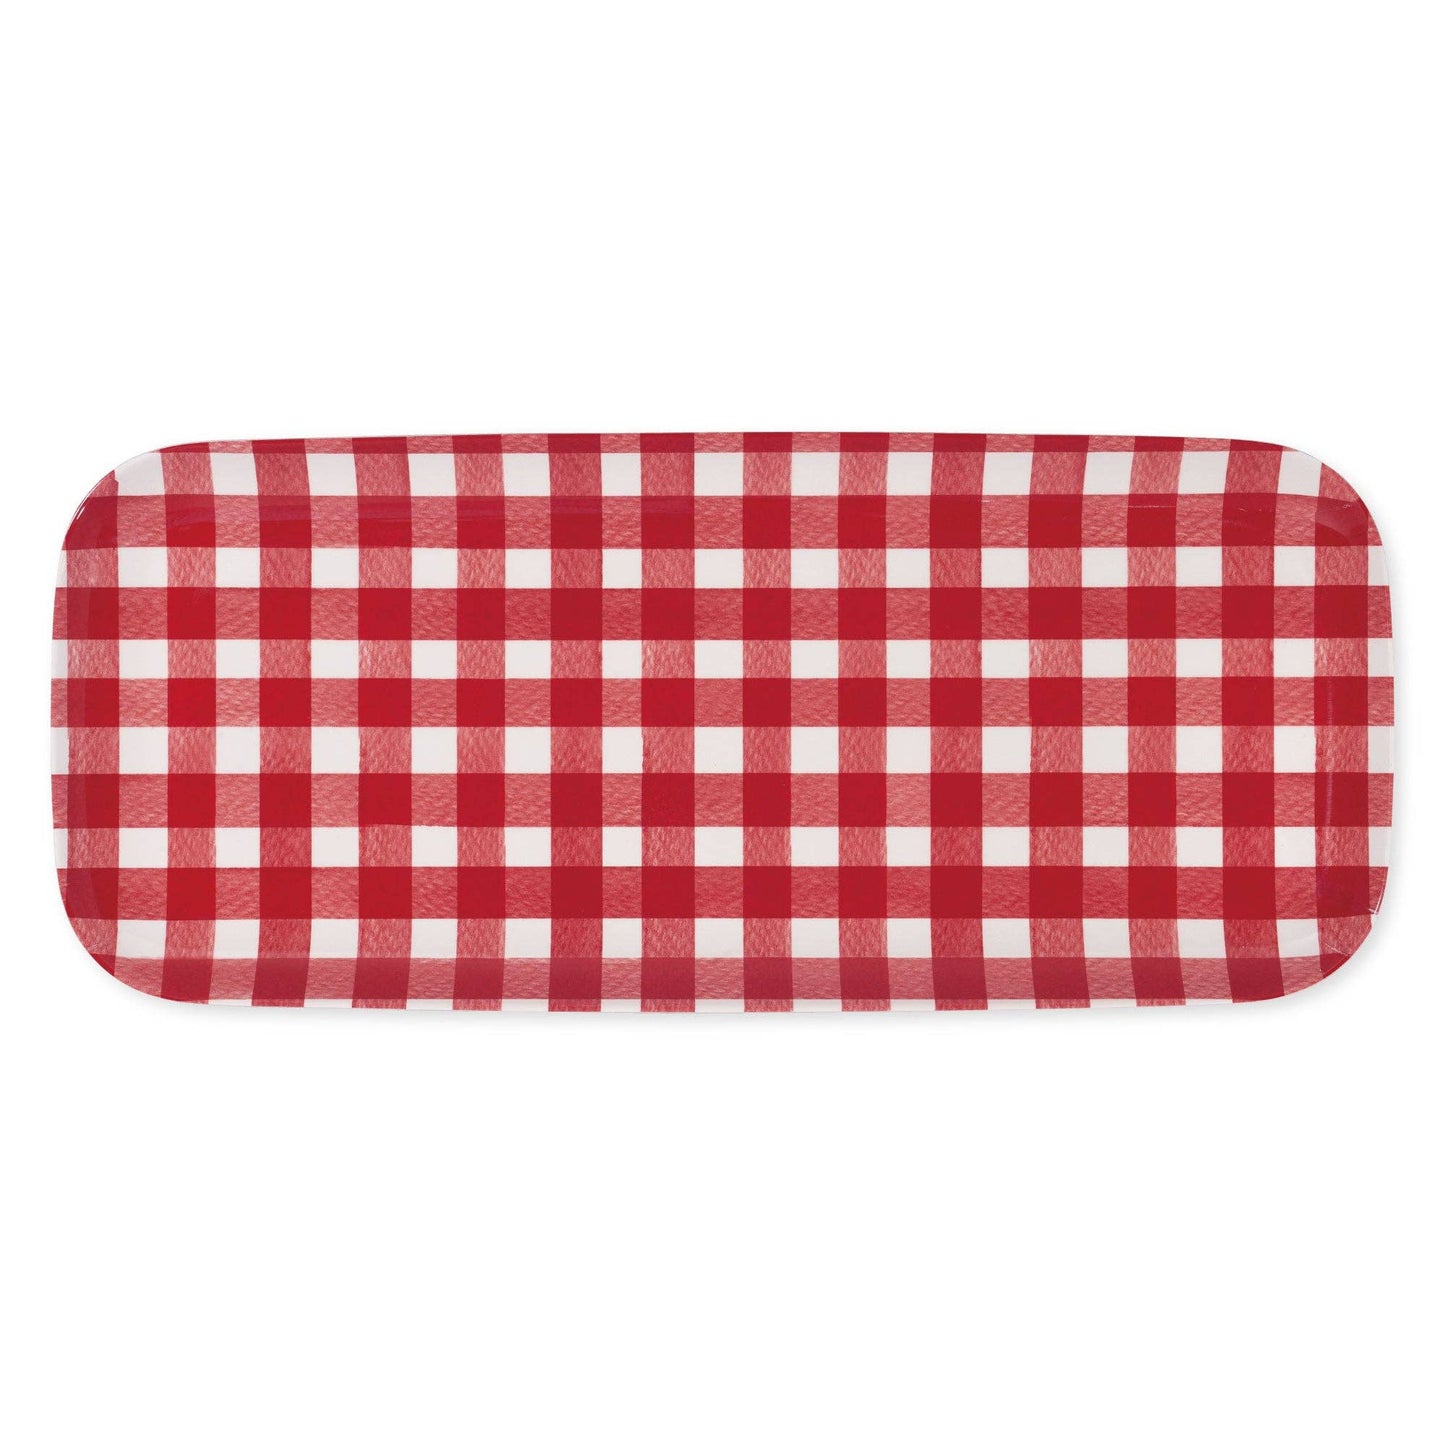 Gingham Red 15" Melamine Rectangle Tray SALE